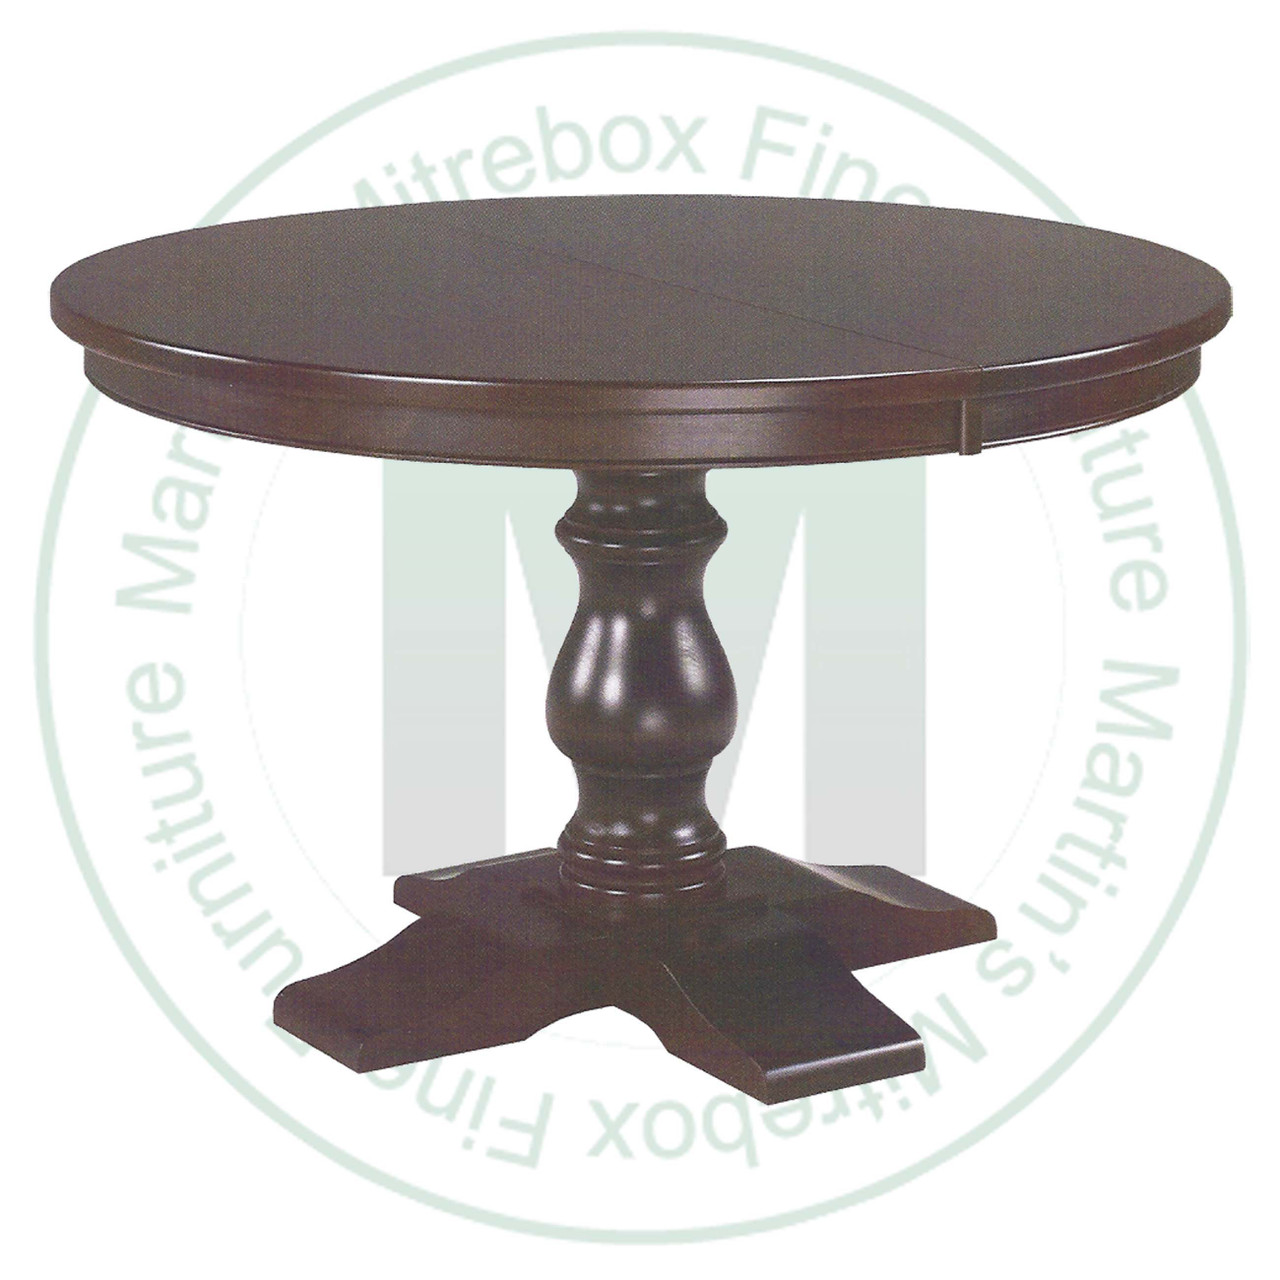 Wormy Maple Savannah Single Pedestal Table 54''D x 54''W x 30''H With 2 - 12'' Leaves Table. Table Has 1'' Thick Top.